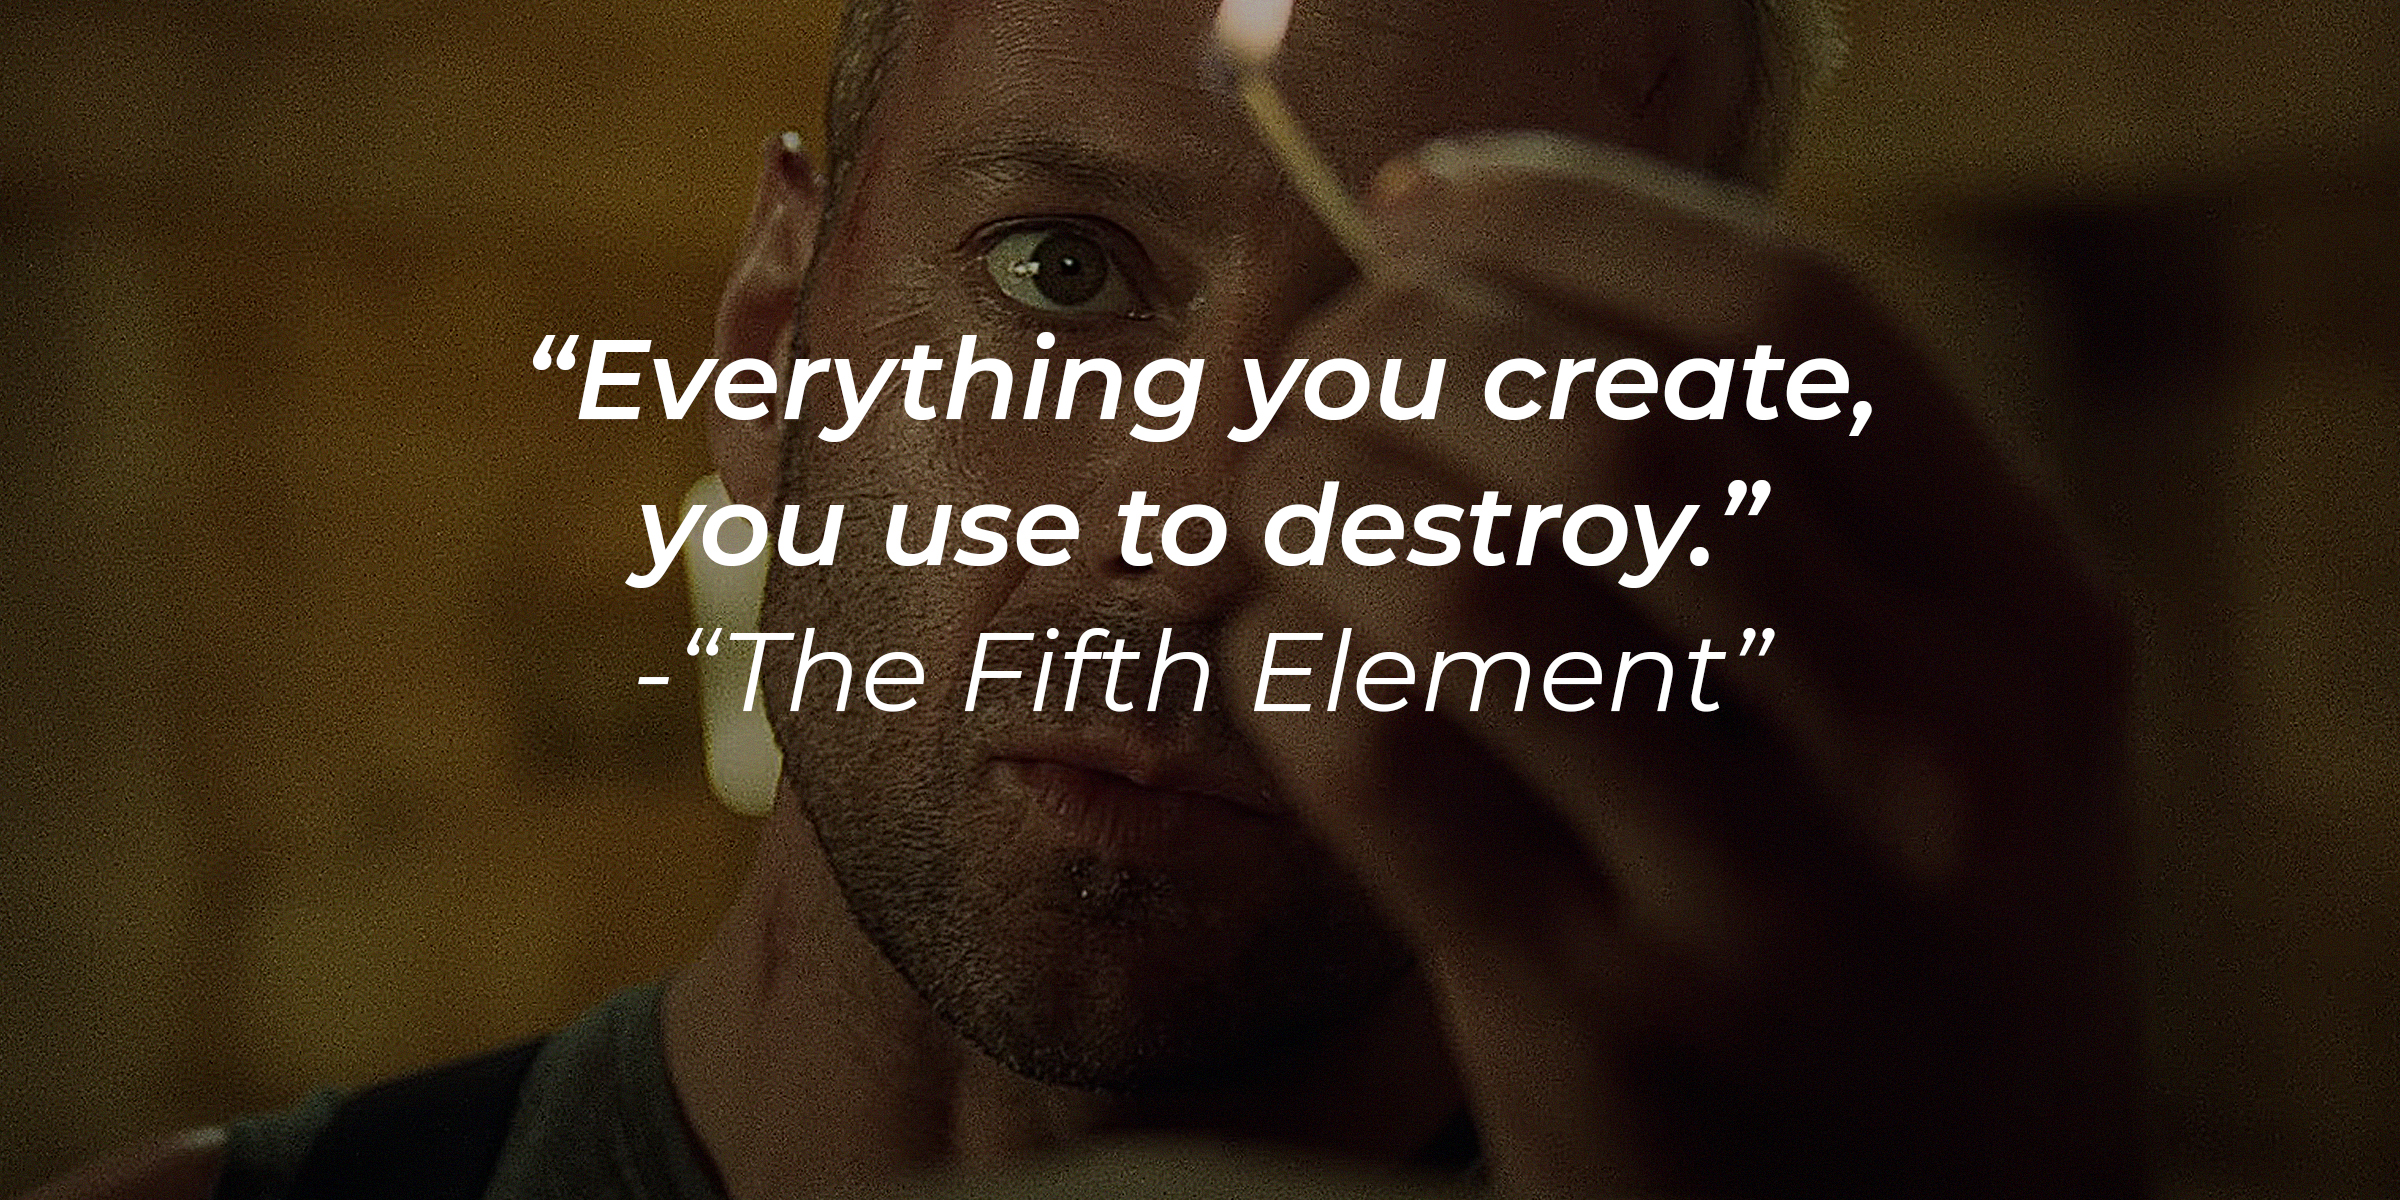 A photo of Korben Dallas from the "The Fifth Element" film with the quote: "Everything you create, you use to destroy." | Source: youtube.com/sonypictures